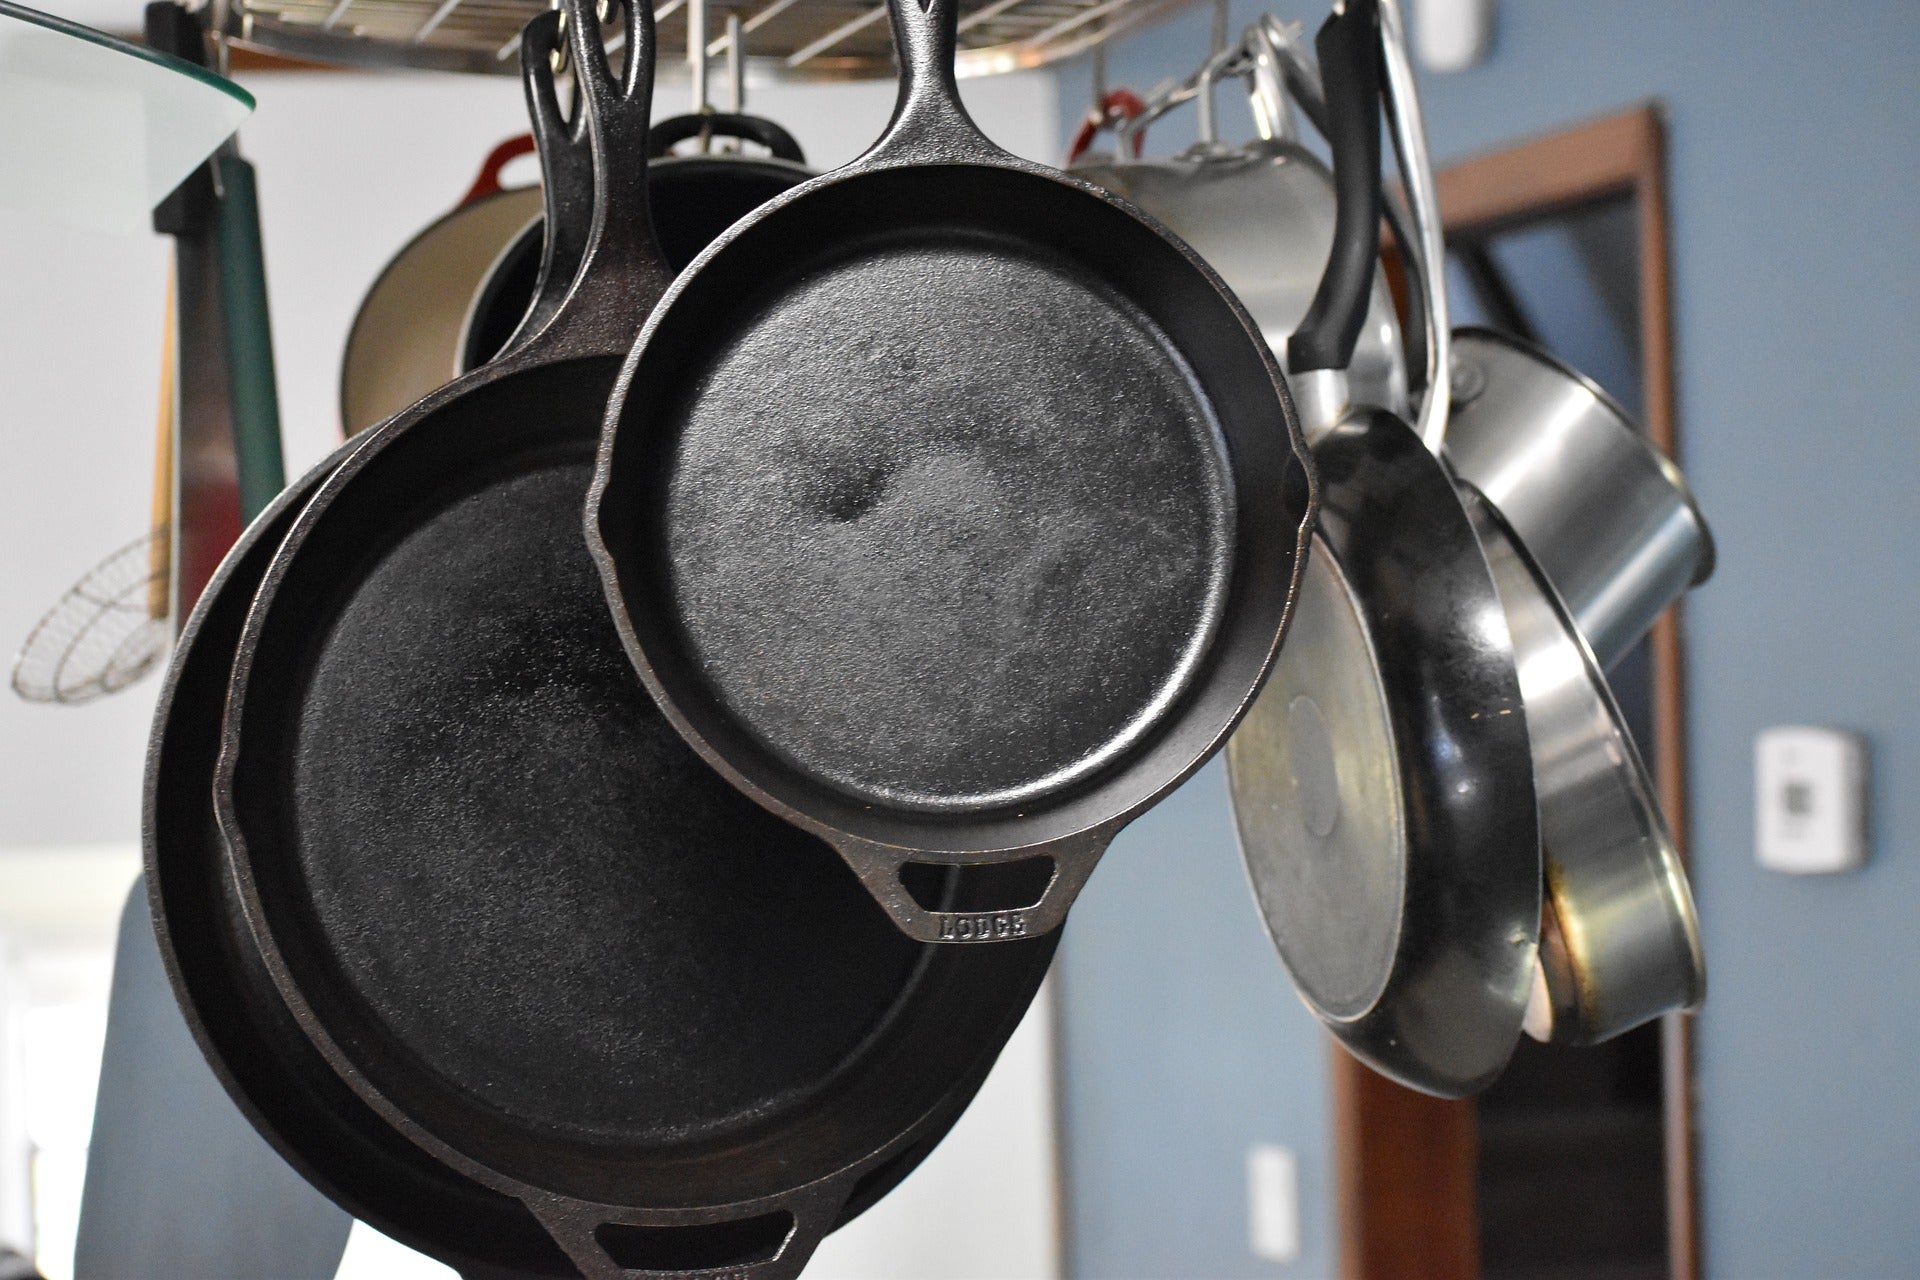 What is the safest cookware?